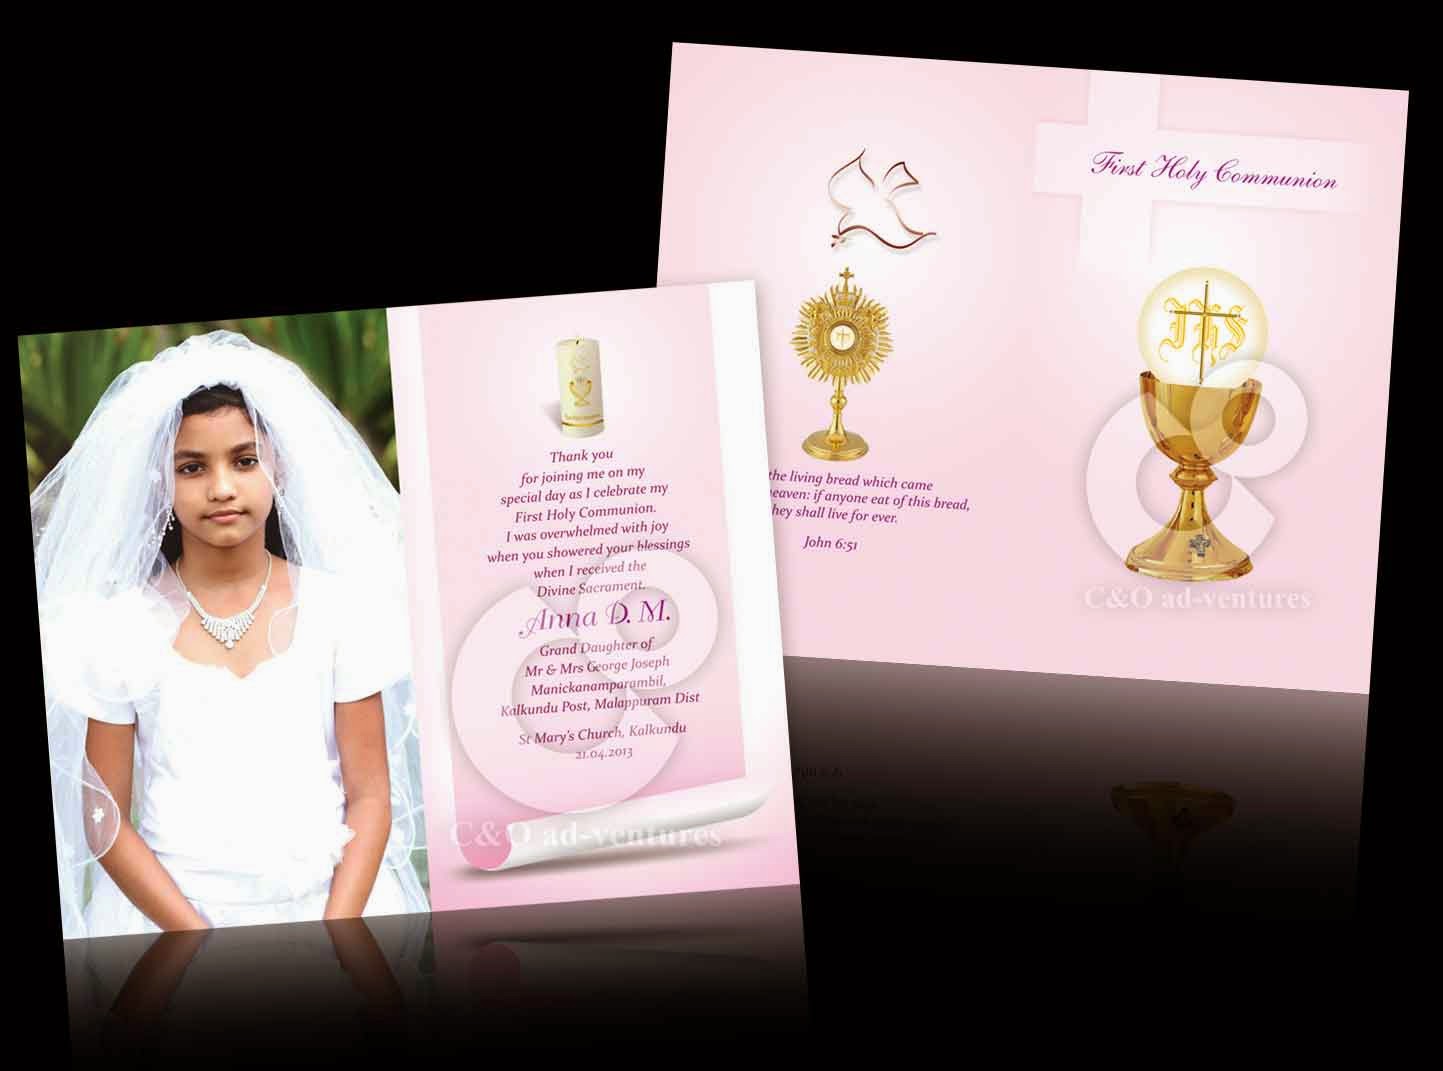 c-o-ad-ventures-first-holy-communion-invitation-card